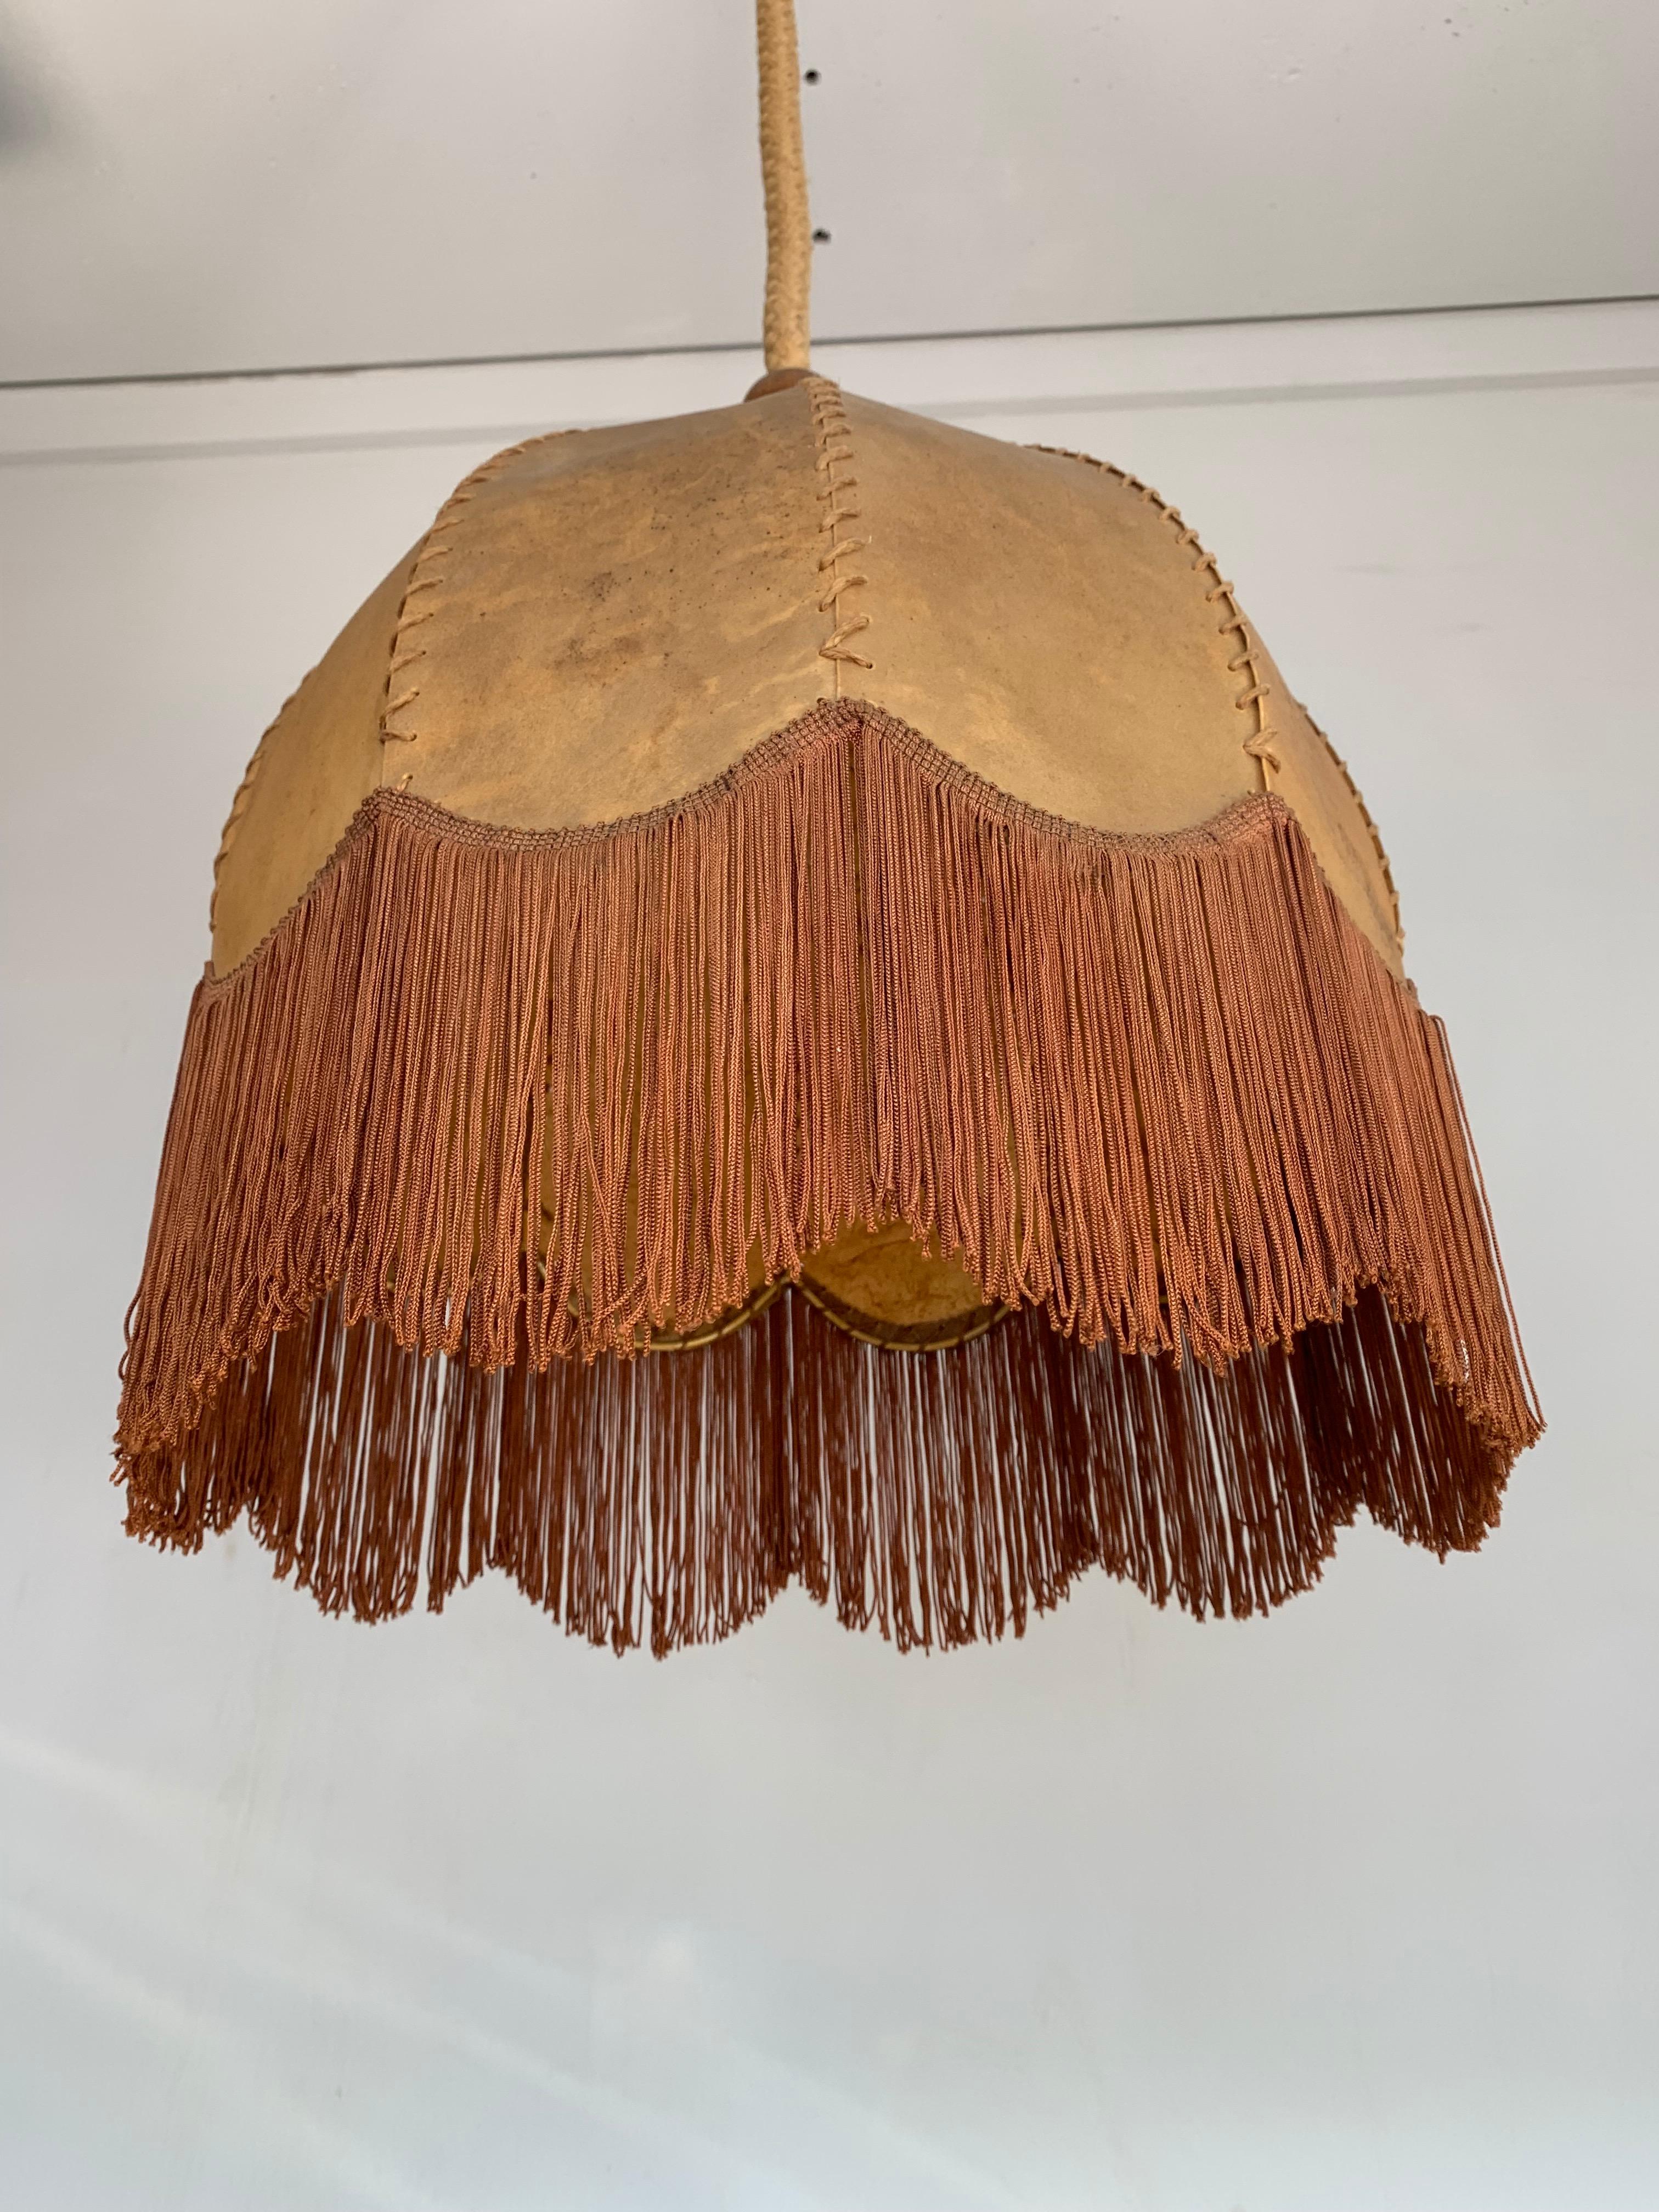 20th Century Good Looking Home Design Leather, Fringes, Wood and Rope Pendant Light, 1930s